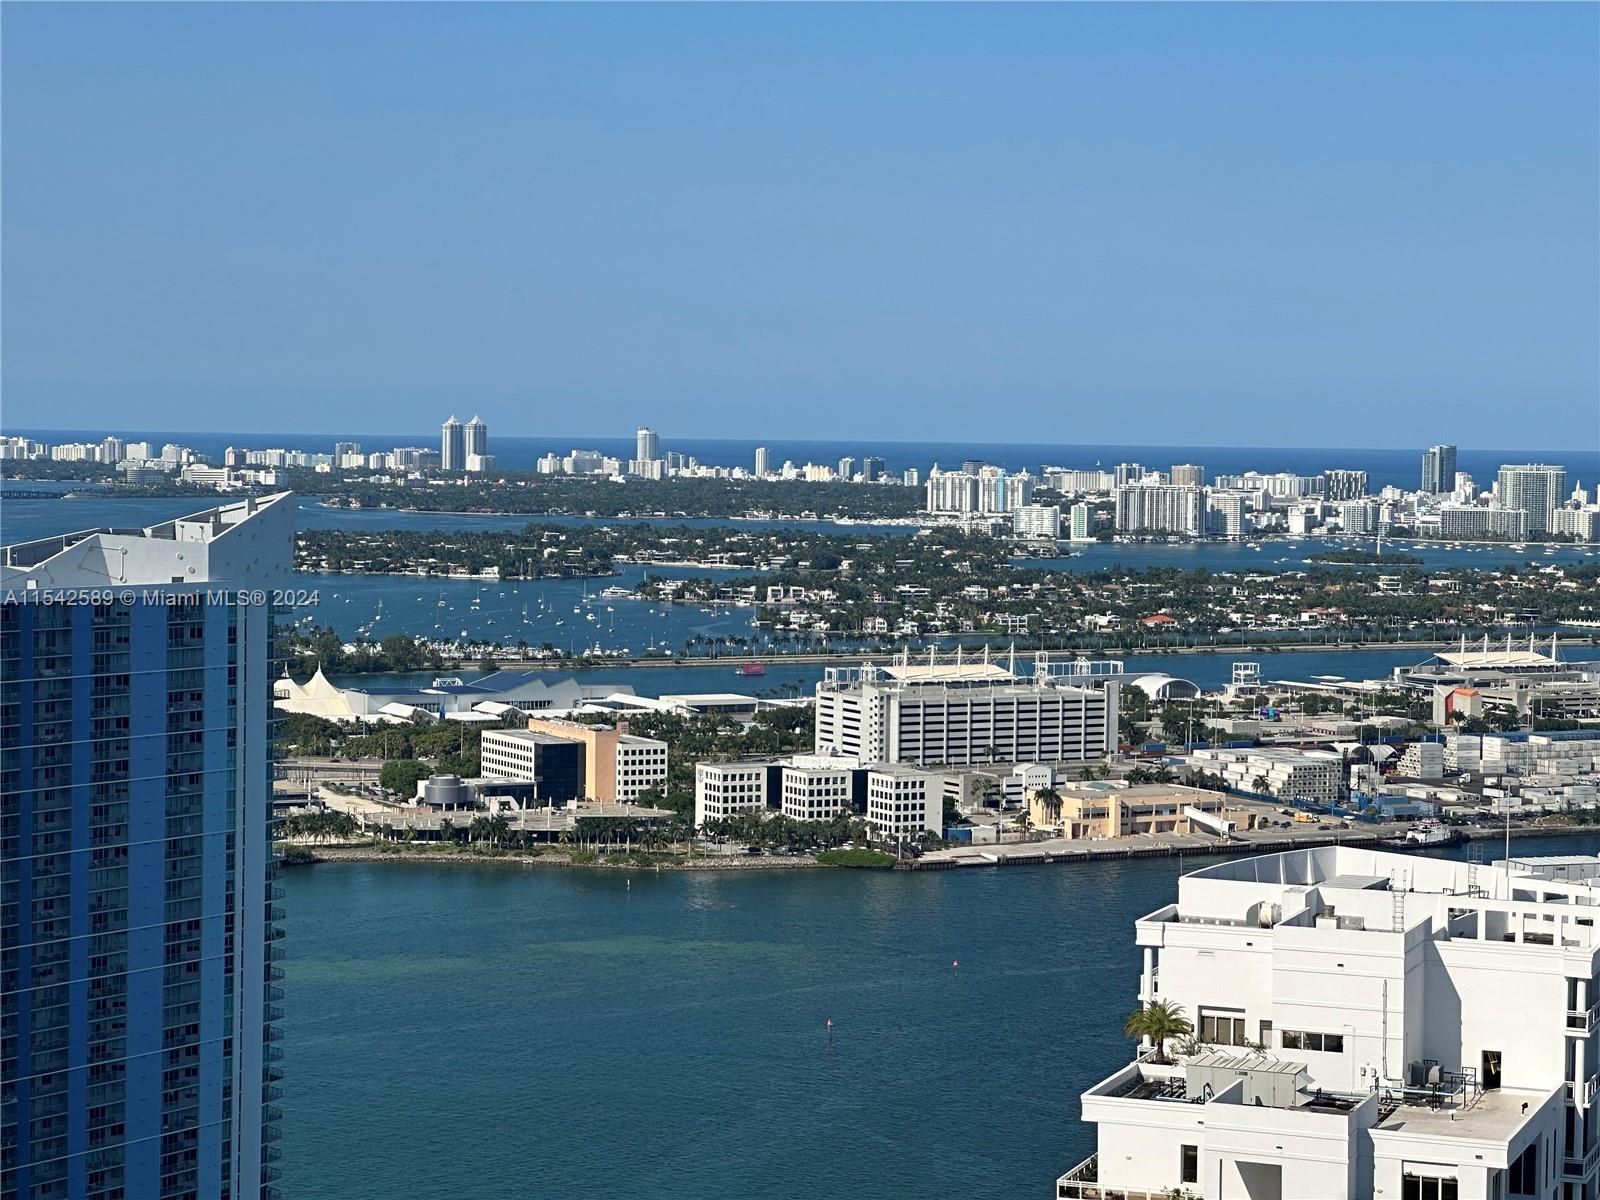 Furnished 1/1 on the 49th floor with amazing Bay views. Enjoy endless water views from your private terrace. Porcelain floors throughout, updated Italian kitchen with top of the line appliances. Full size washer/dryer. Enjoy resort style amenities, designed by famous Architect/Designer Philip Stark. Full service building in the heart of Miami Brickell. Walking distance to many Restaurants (on site: famous Mexican Restaurant Cantina La Veinte), Brickell City Center, Whole Foods. Minutes from Miami Arena and Bayfront Park. 1 assigned parking space. 
Tenant occupied until April 30th 2024